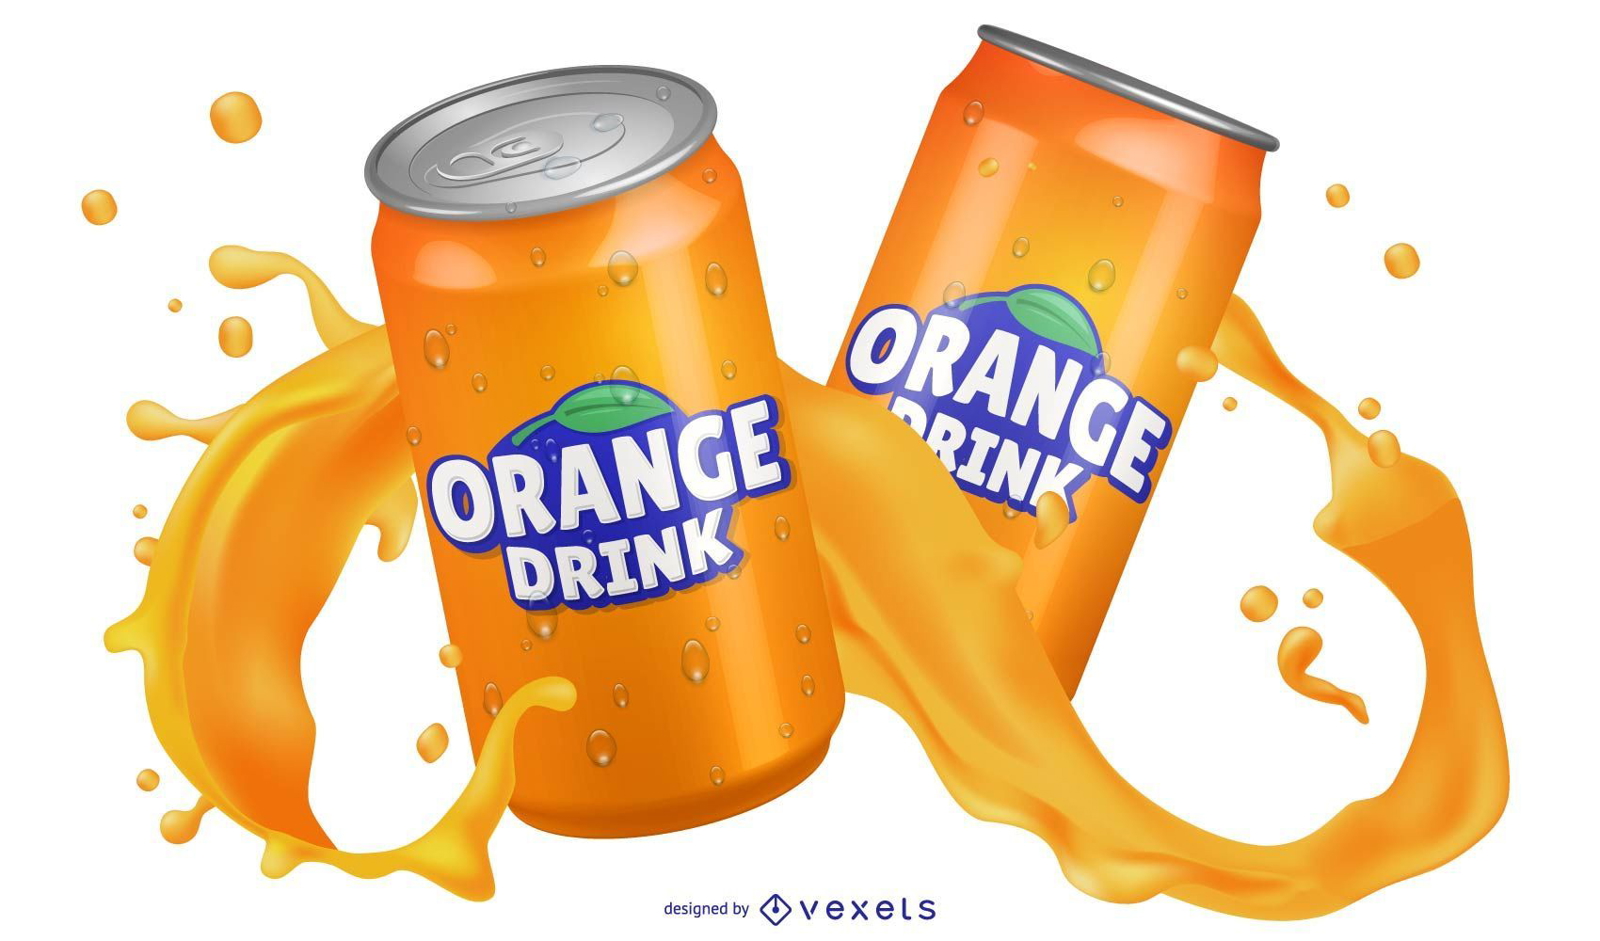 Orange Drink in a Can